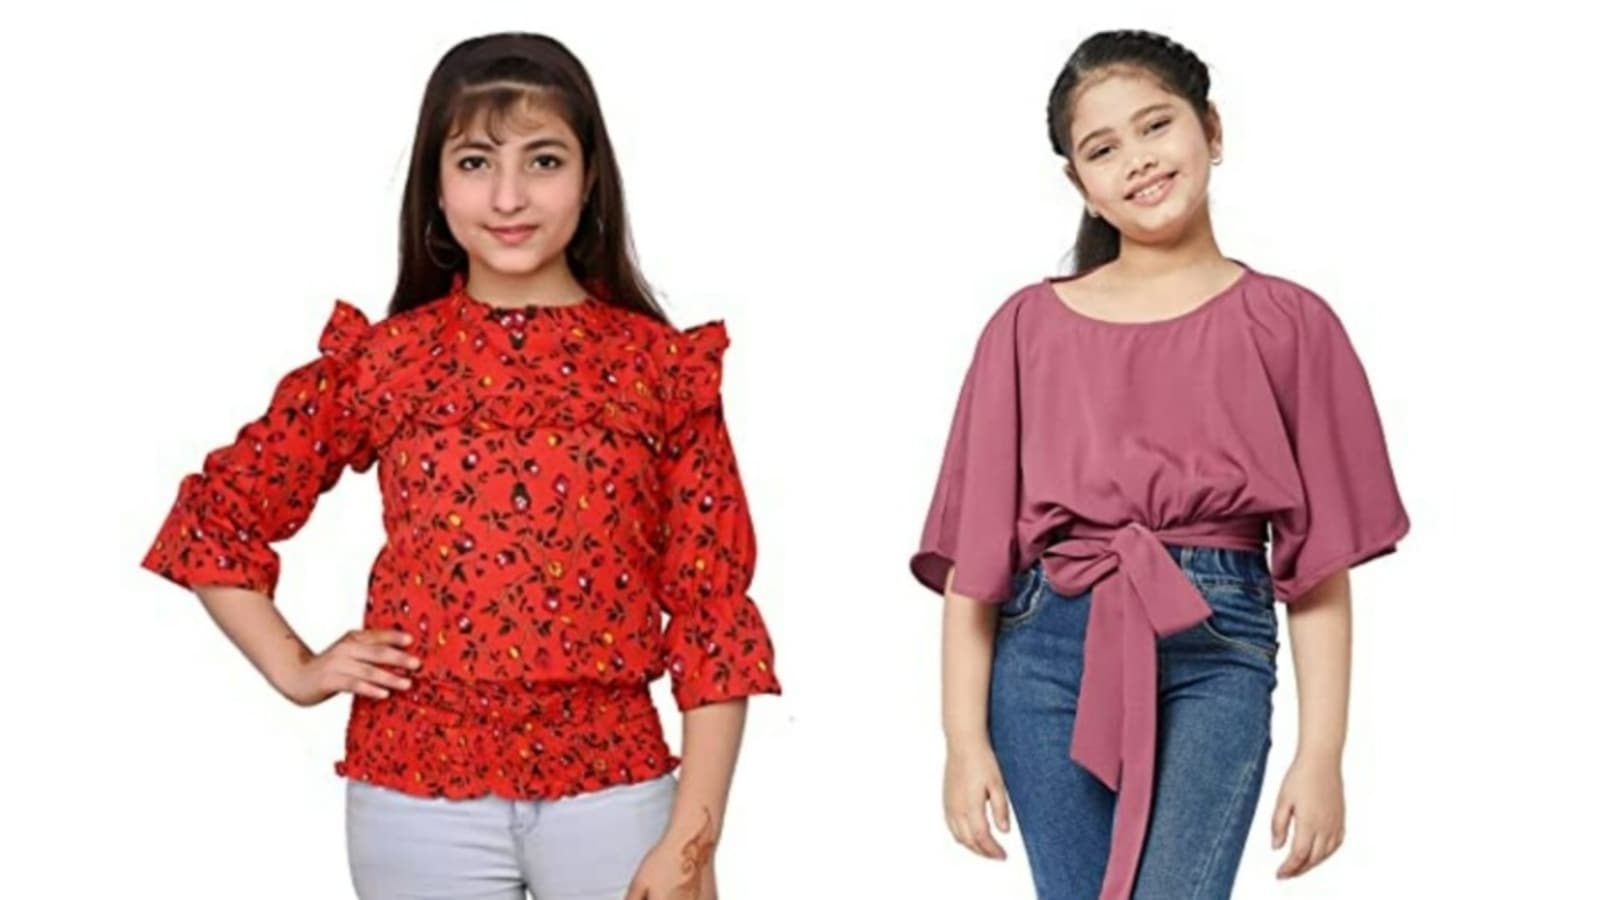 fashion sale: Fetch up to 75% off on stylish tops for girls